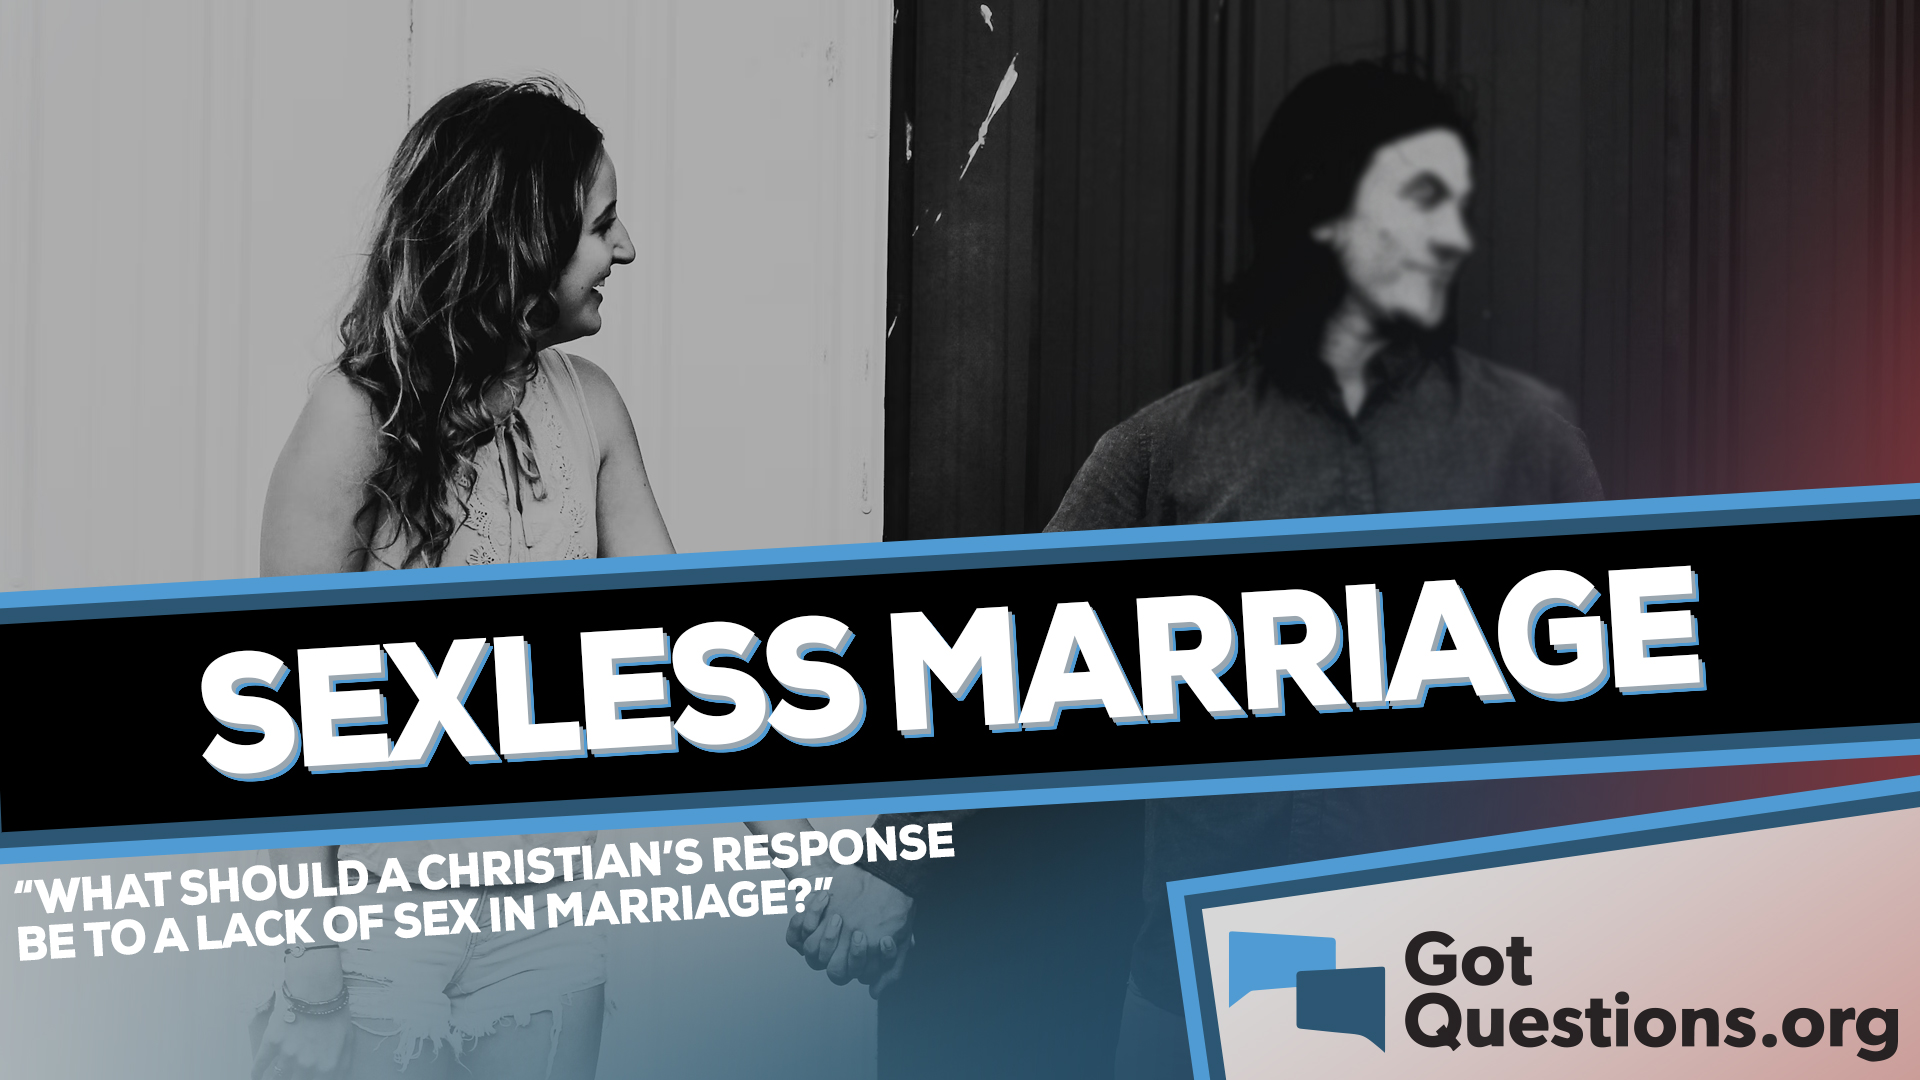 What should be a Christians response to a lack of sex in marriage (a sexless marriage)? GotQuestions pic pic